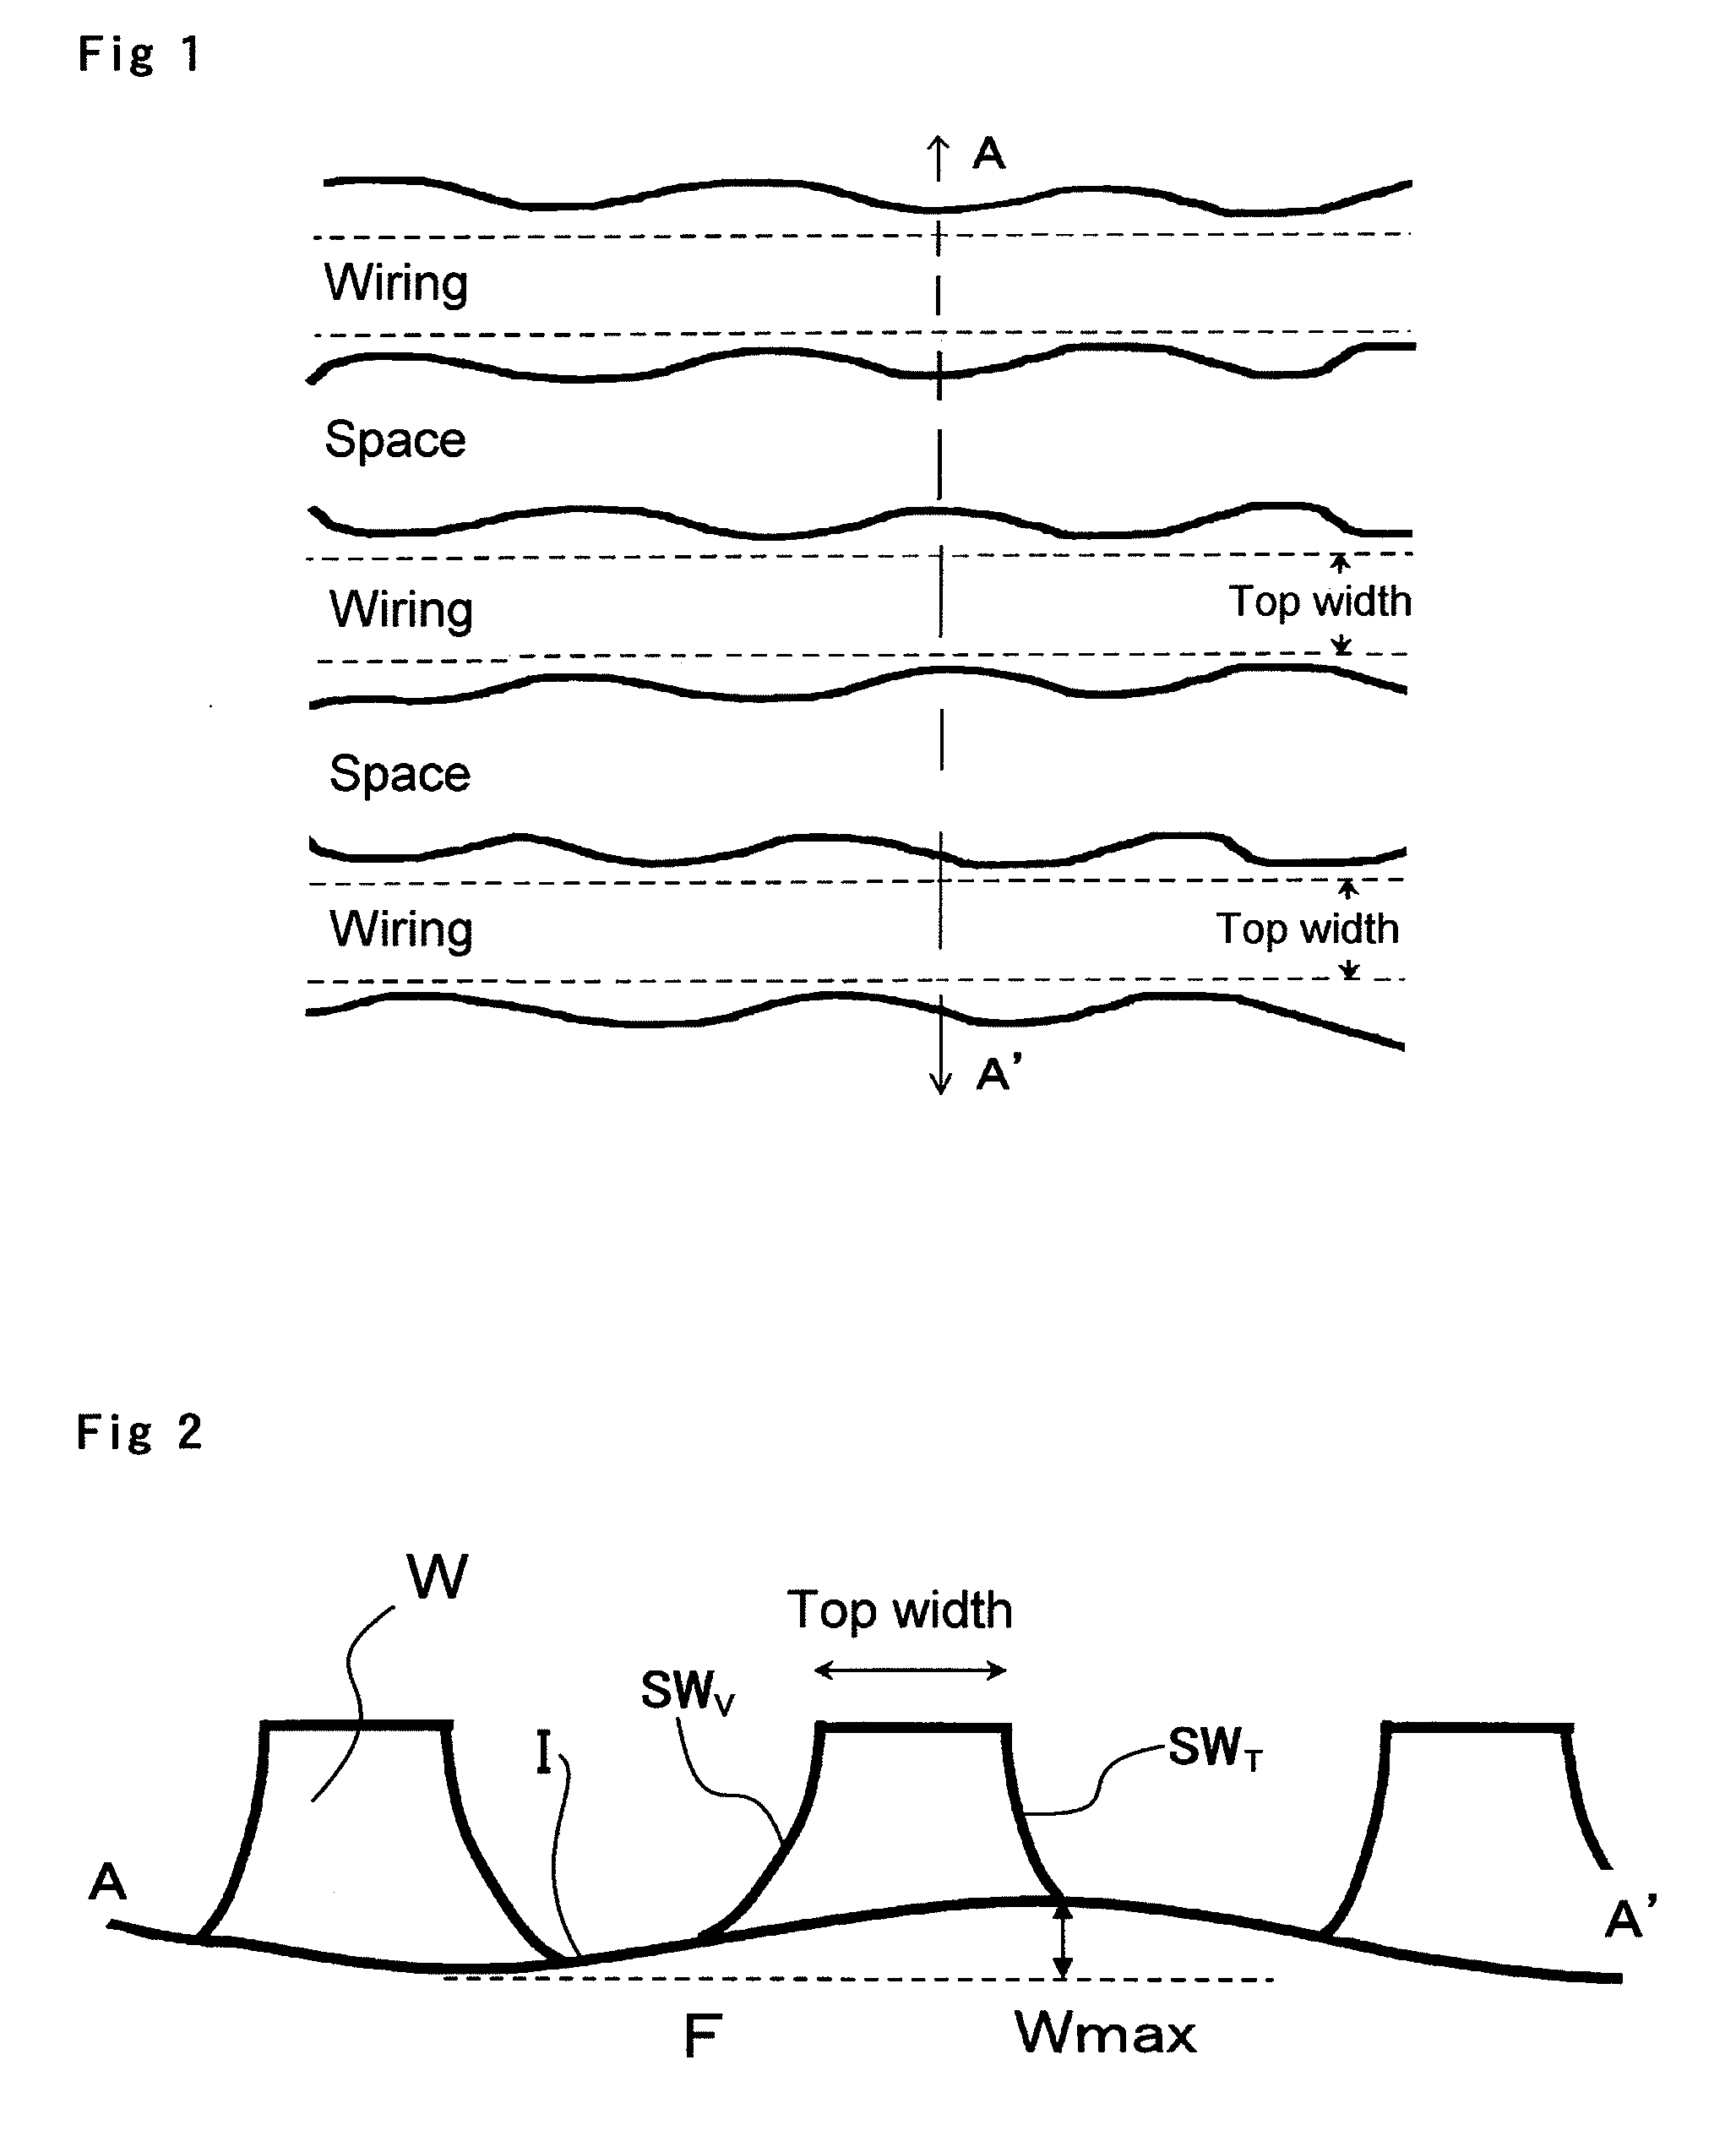 Surface-treated electro-deposited copper foil and method for manufacturing the same